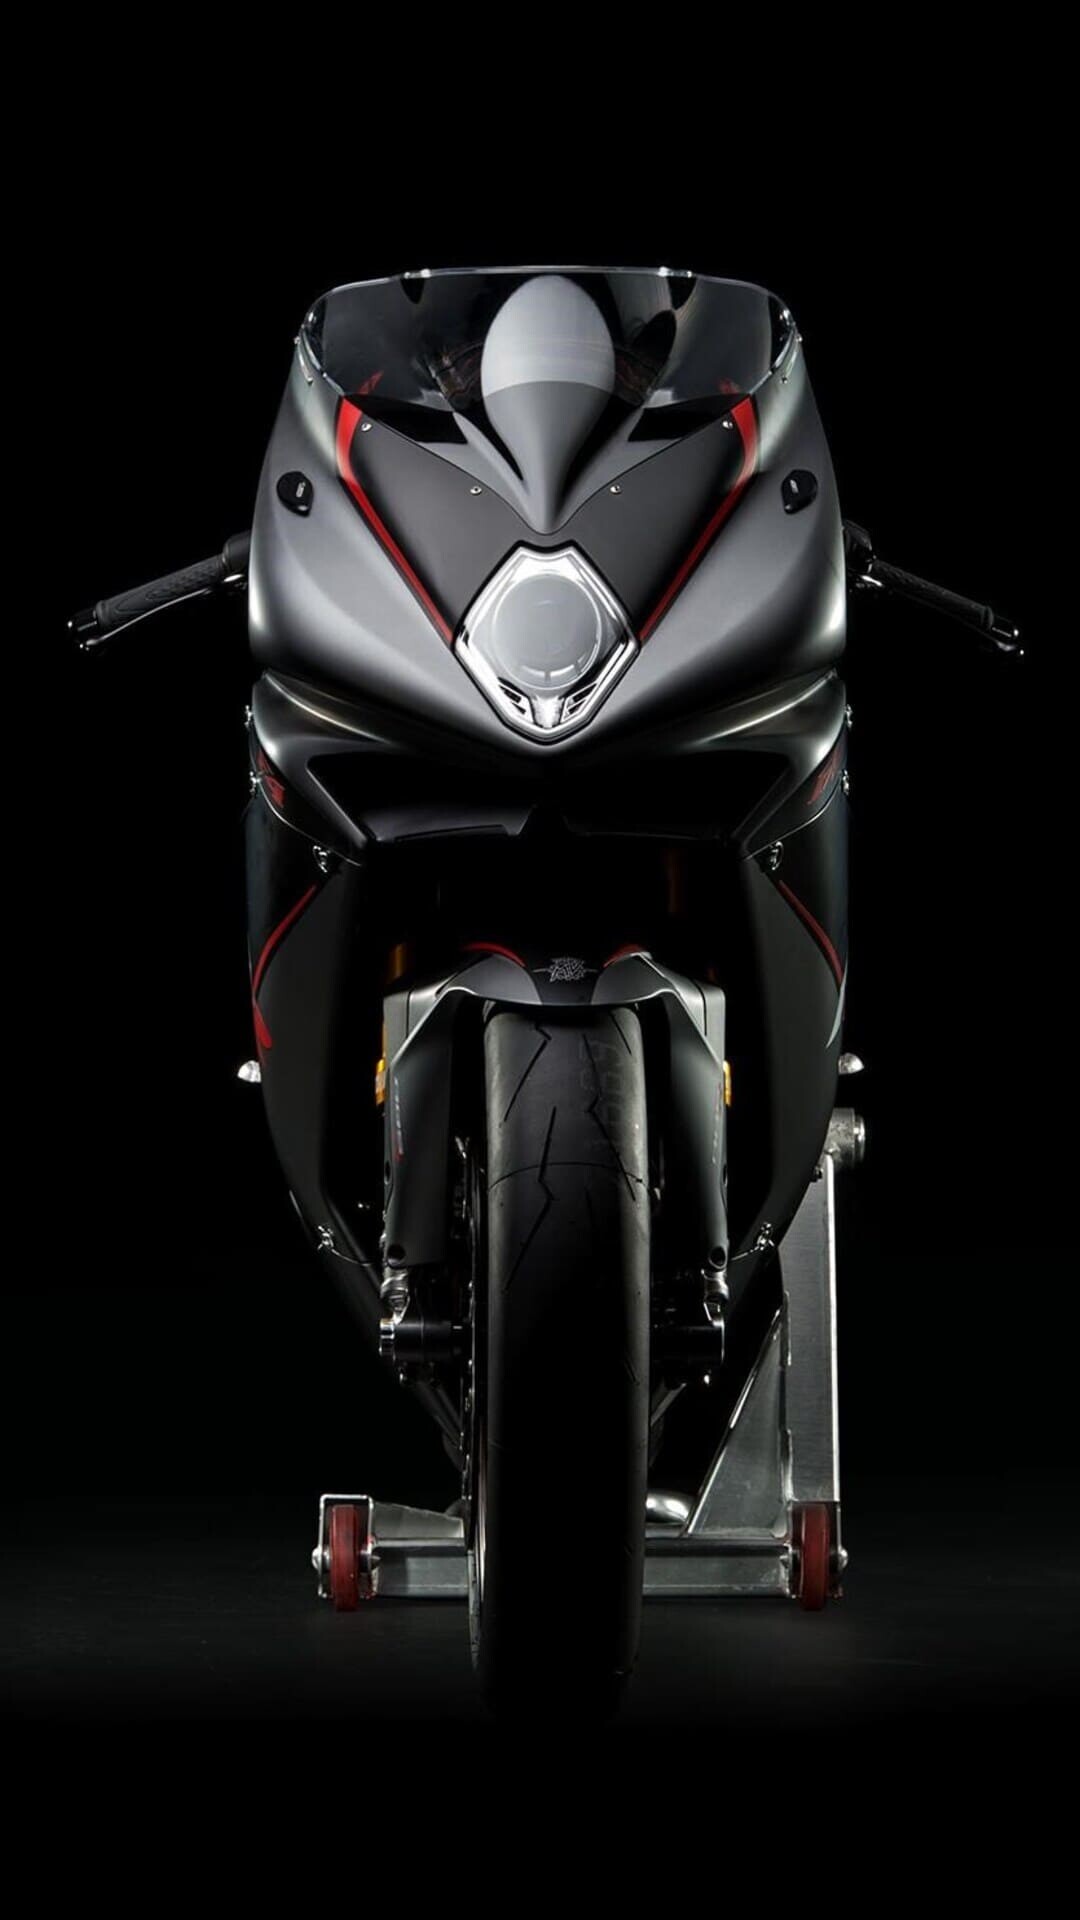 MV Agusta: One of the few motorcycle marques that combined Grand Prix racing success and with an exotic line of road motorcycles. 1080x1920 Full HD Wallpaper.